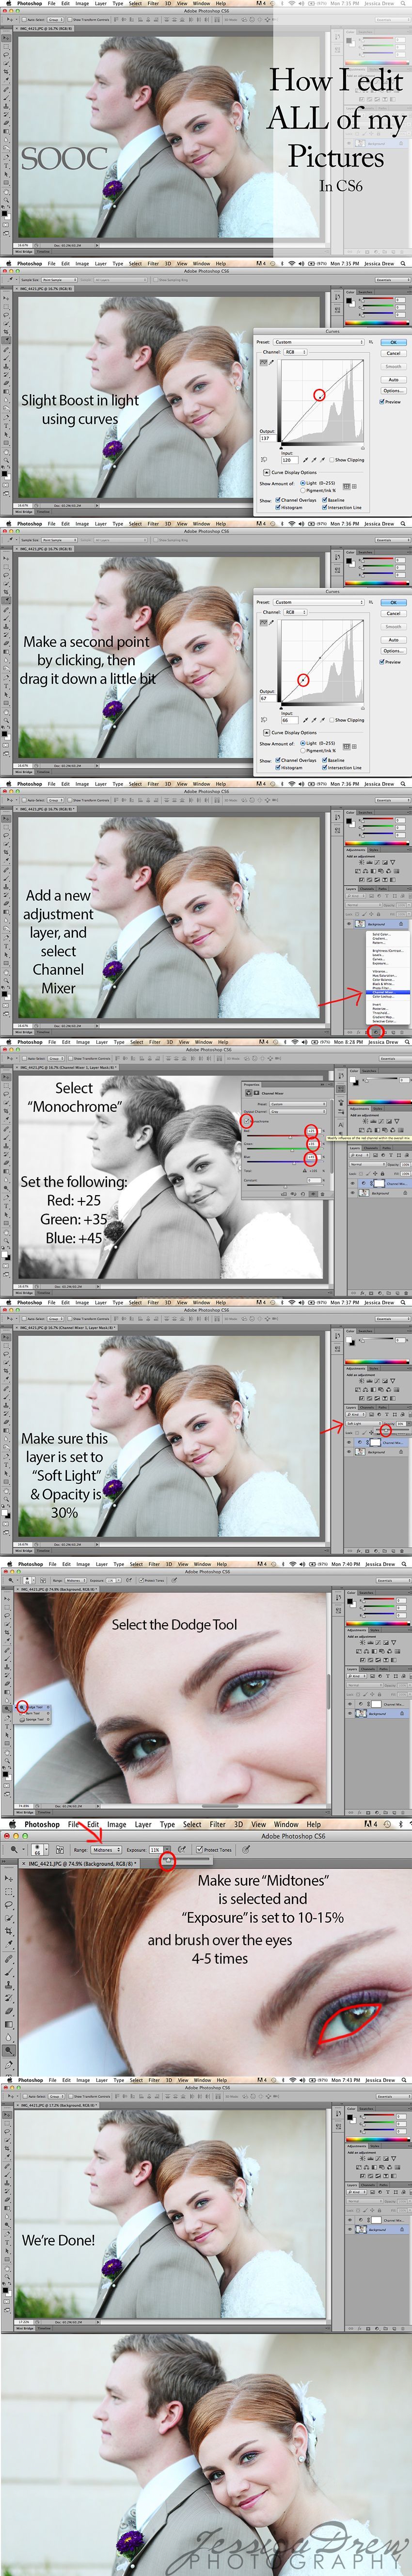 How to basic editing in Photoshop